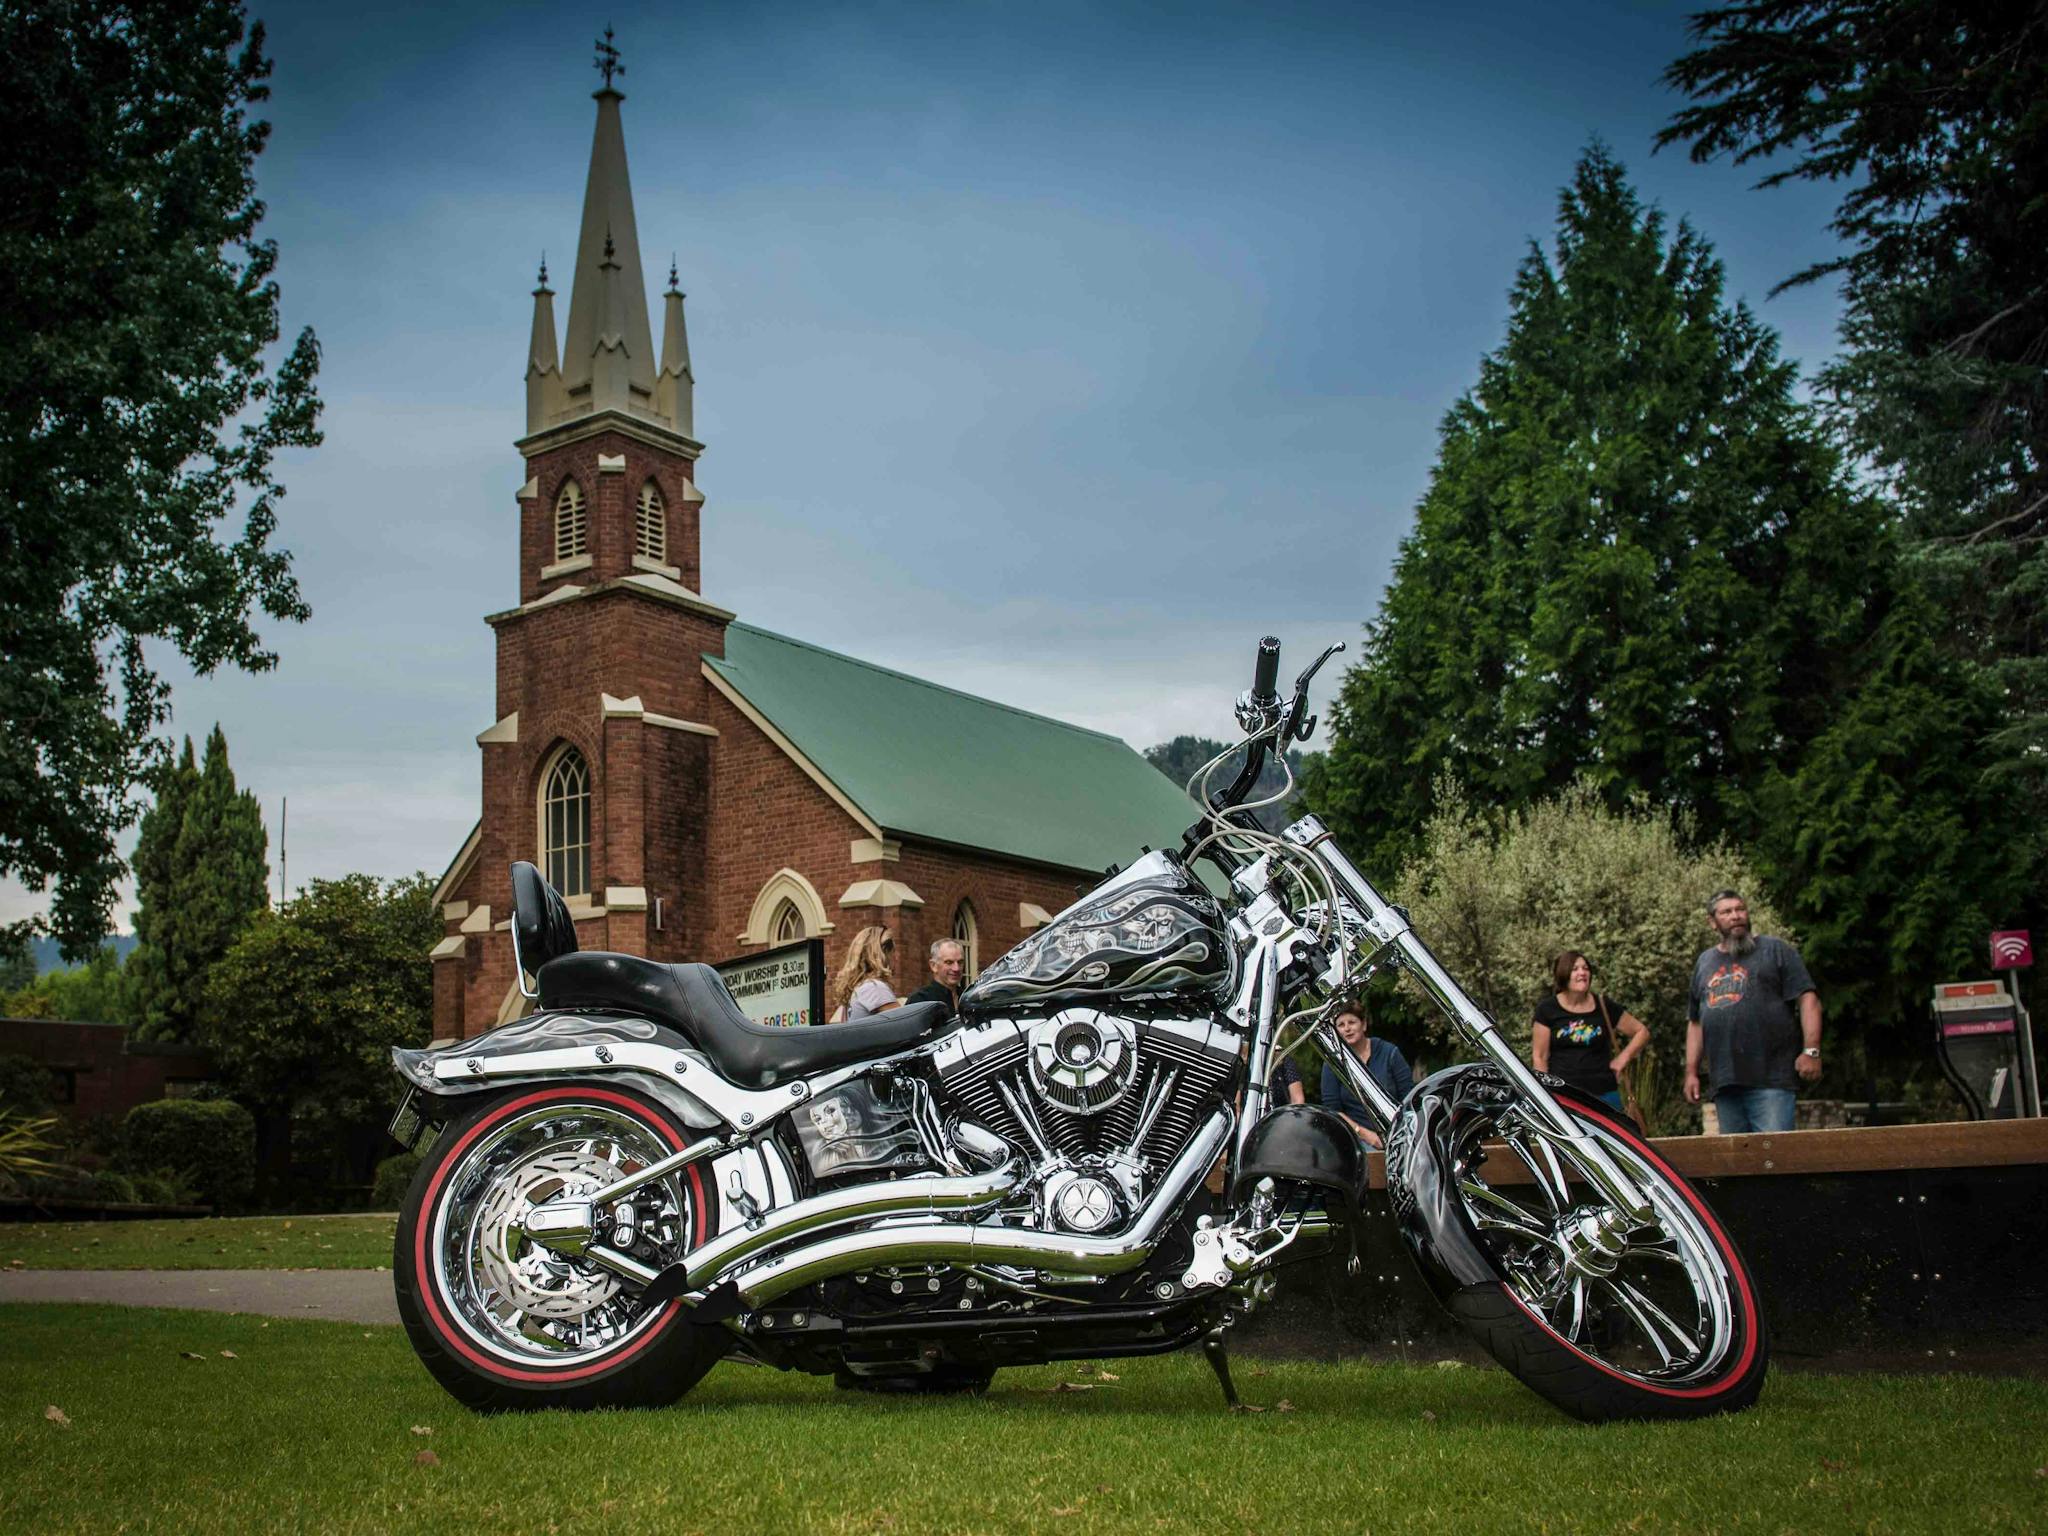 Harley parked in front of the church in the Main Street of Bright